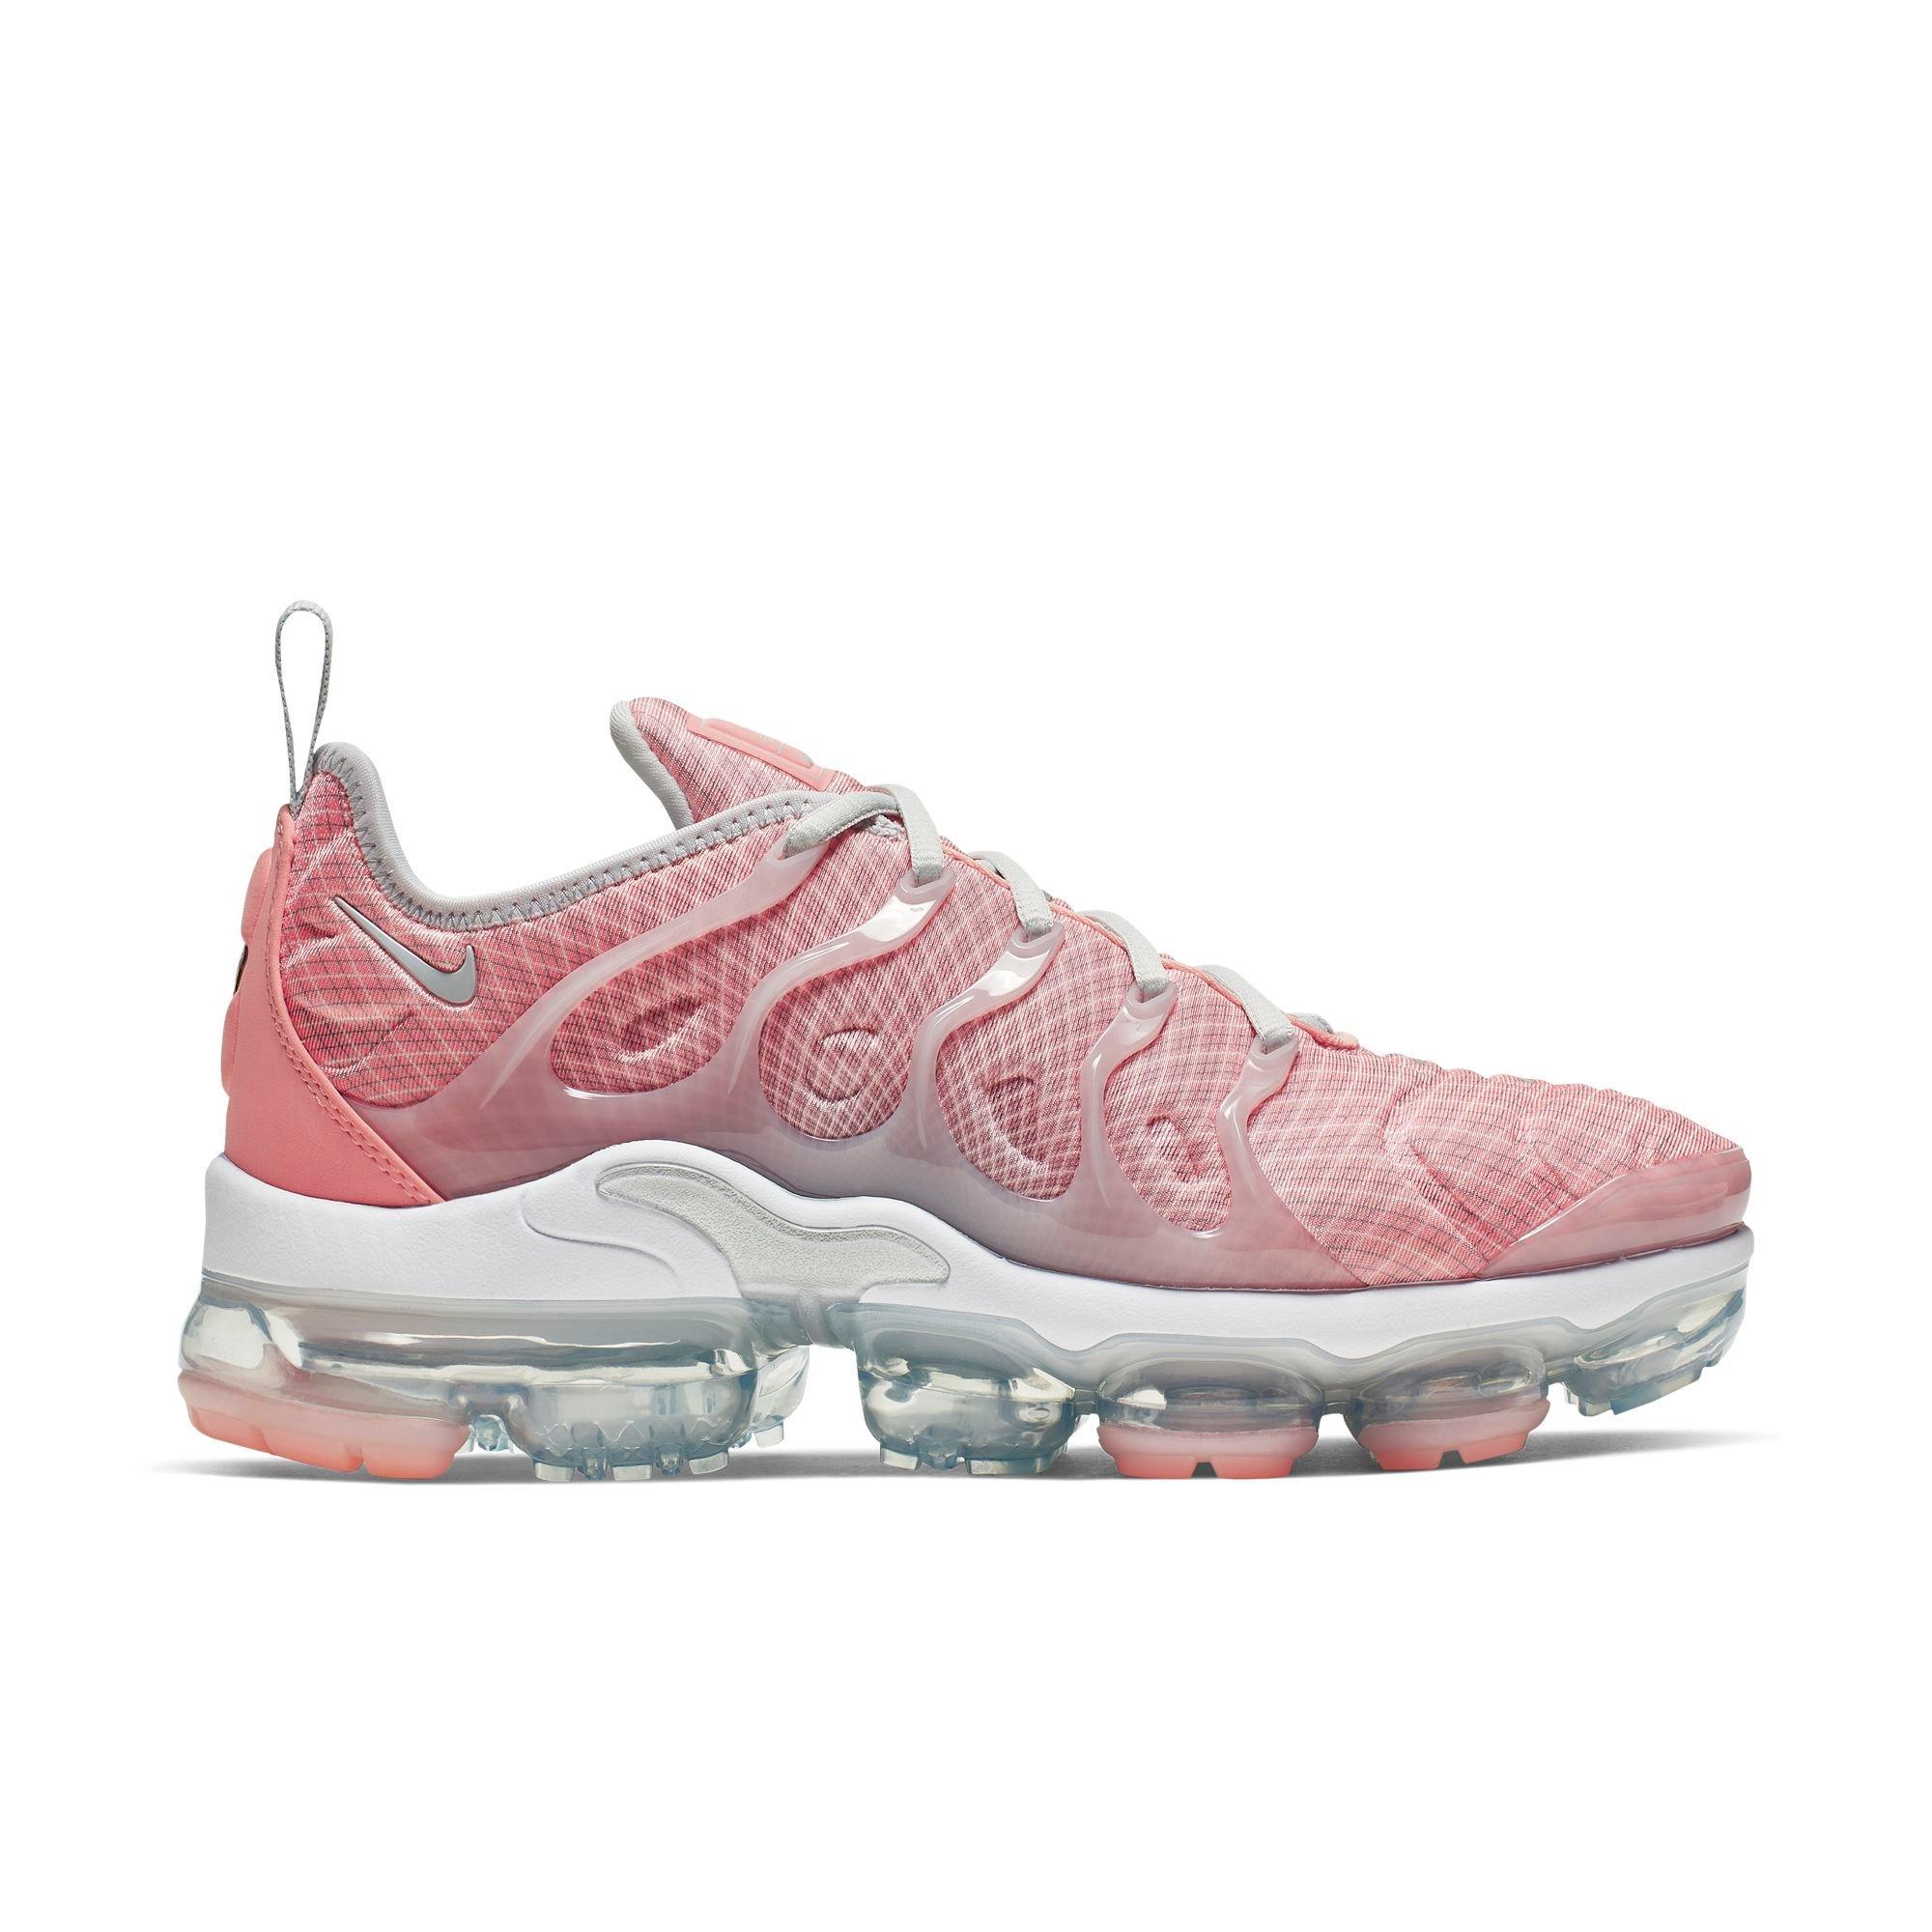 Nike Vapormax Plus Chicago CW6974 100 NGO.by